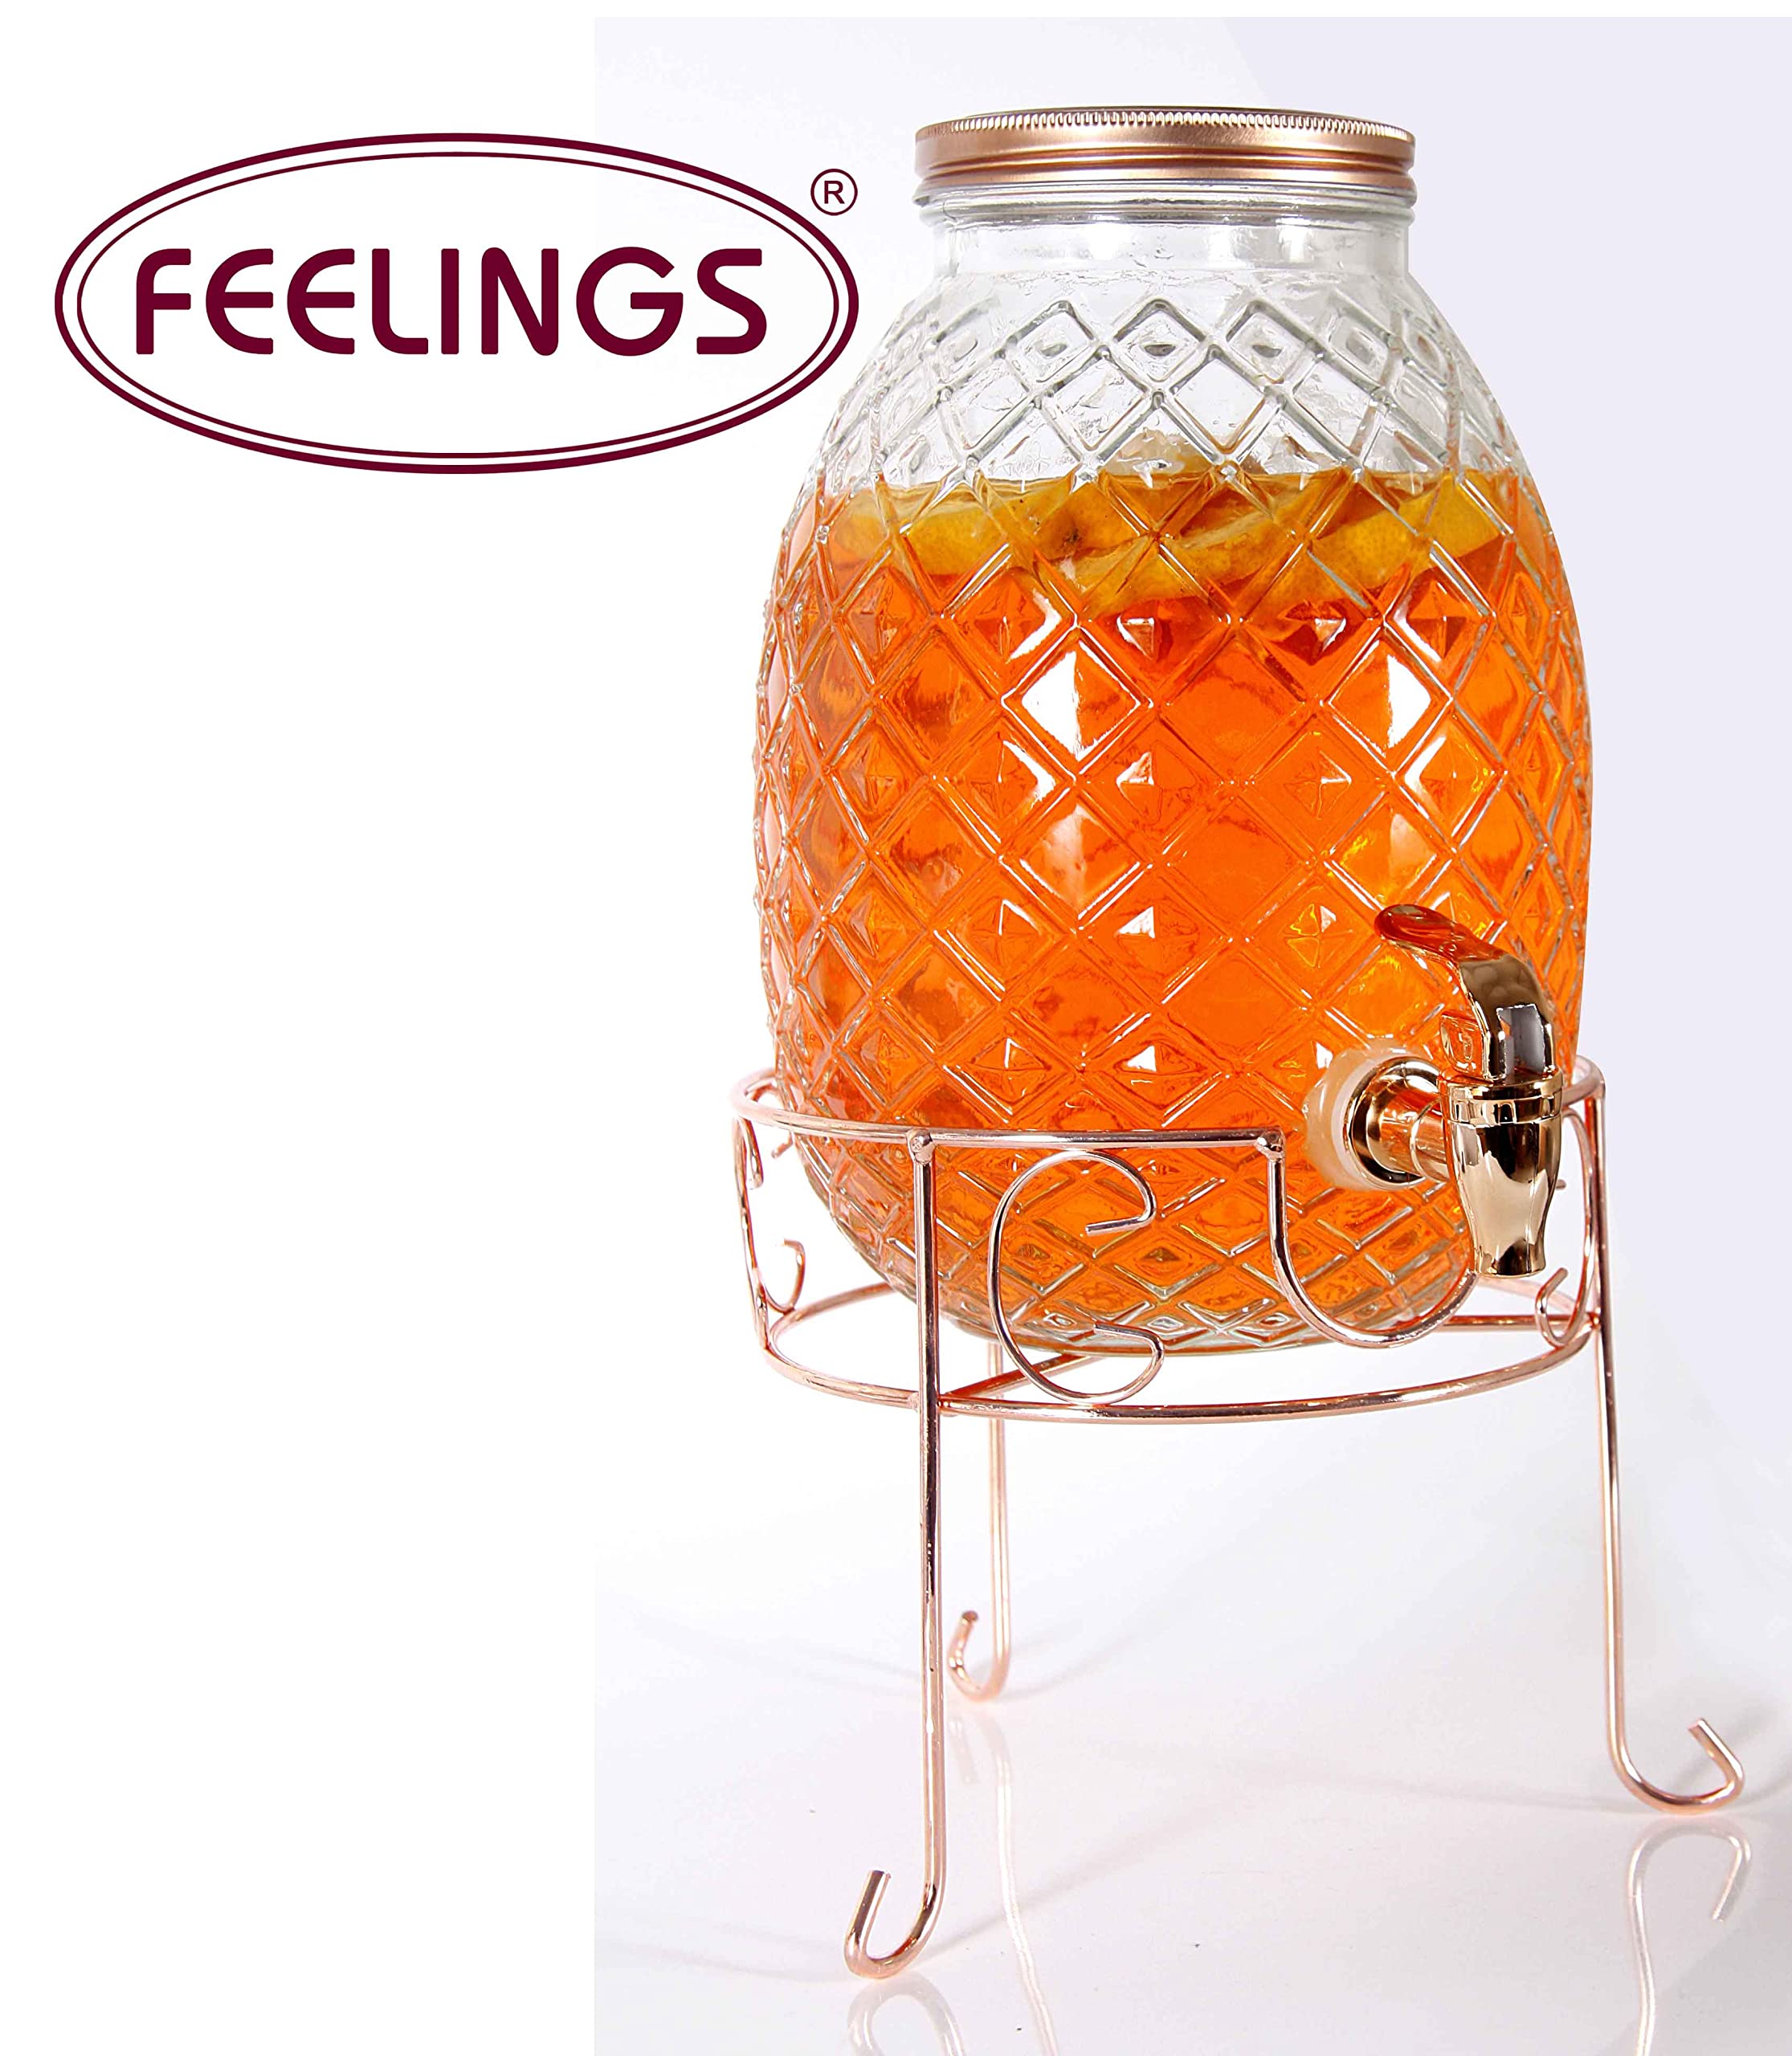 Feelings 4LTR Sip and Savor Your Emotions Glass Beverage Dispenser in Pineapple Shape with Stand and Tap